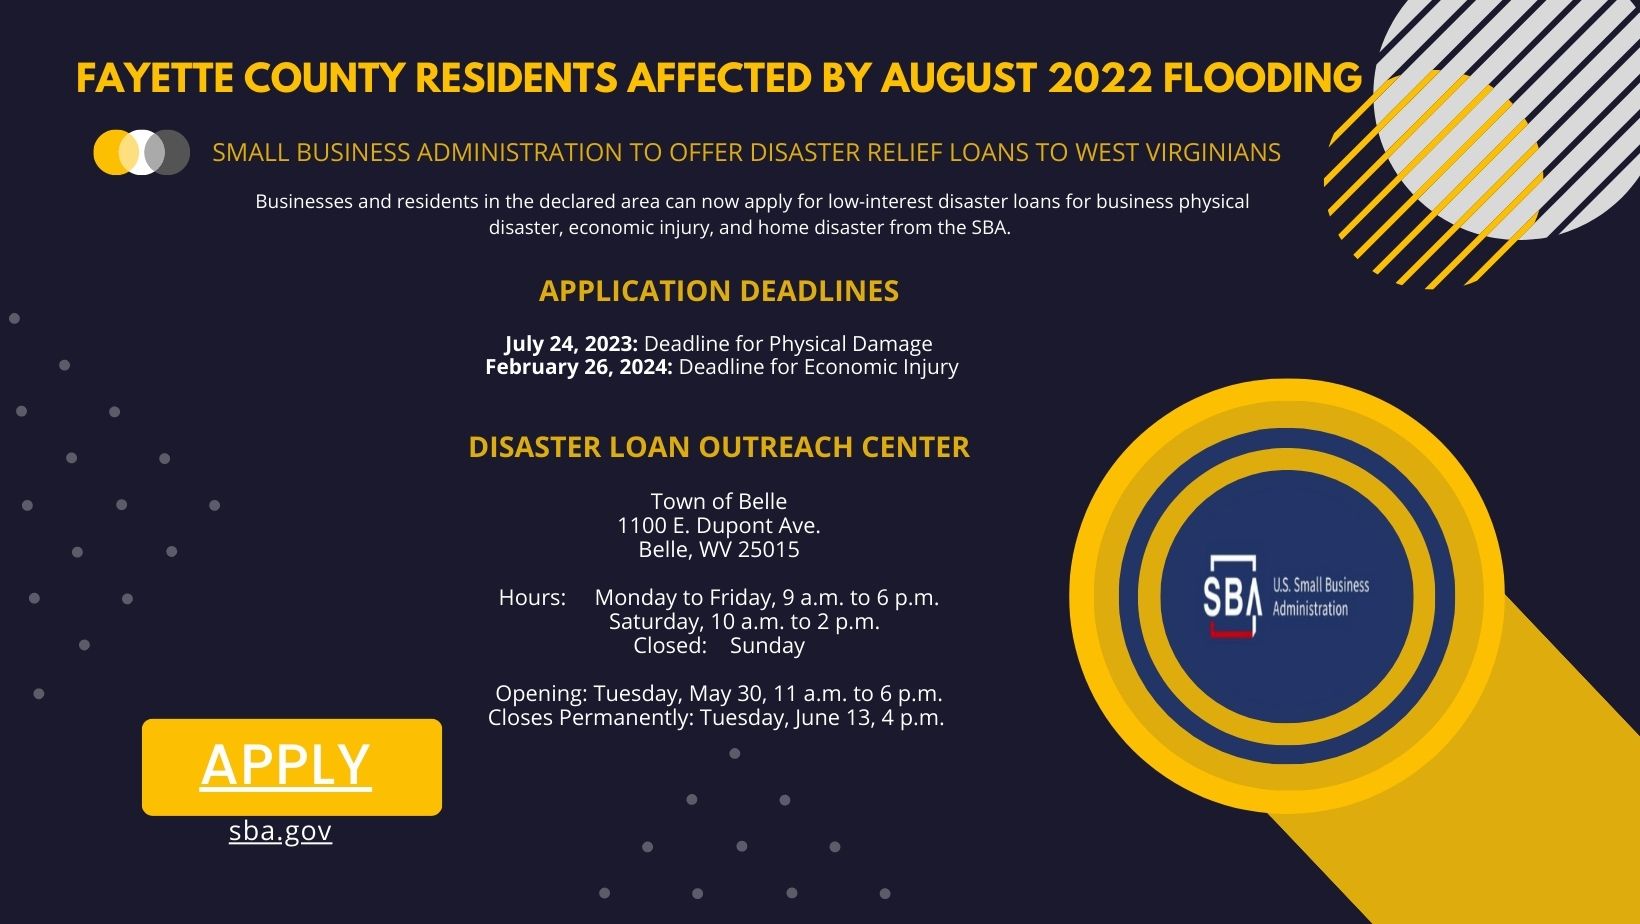 Small Business Administration to Offer Disaster Relief (loans) to West Virginians.jpg